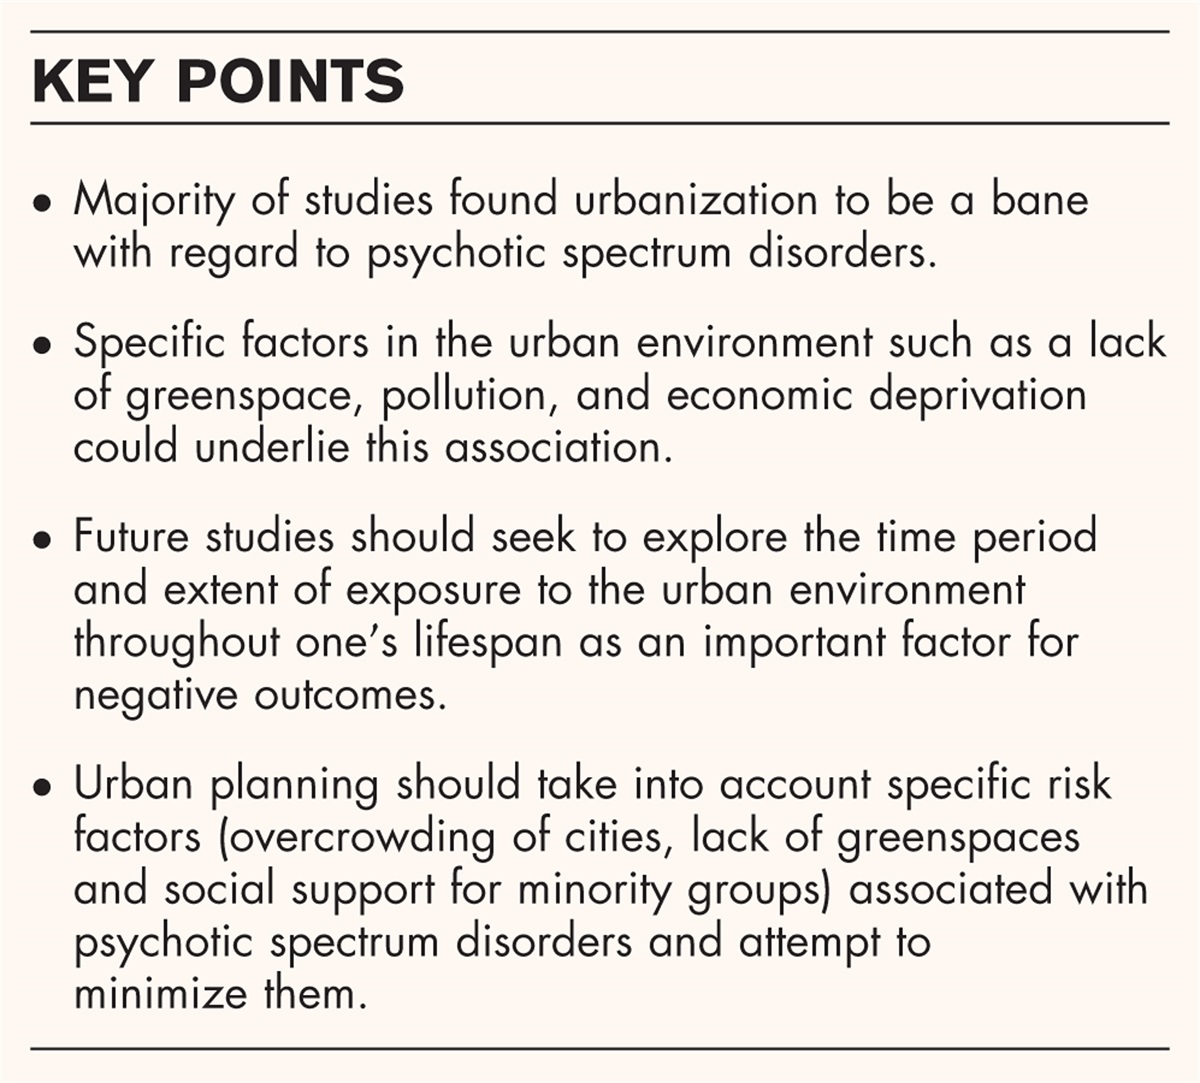 Bane or boon regarding urbanicity and psychotic spectrum disorders: a scoping review of current evidence